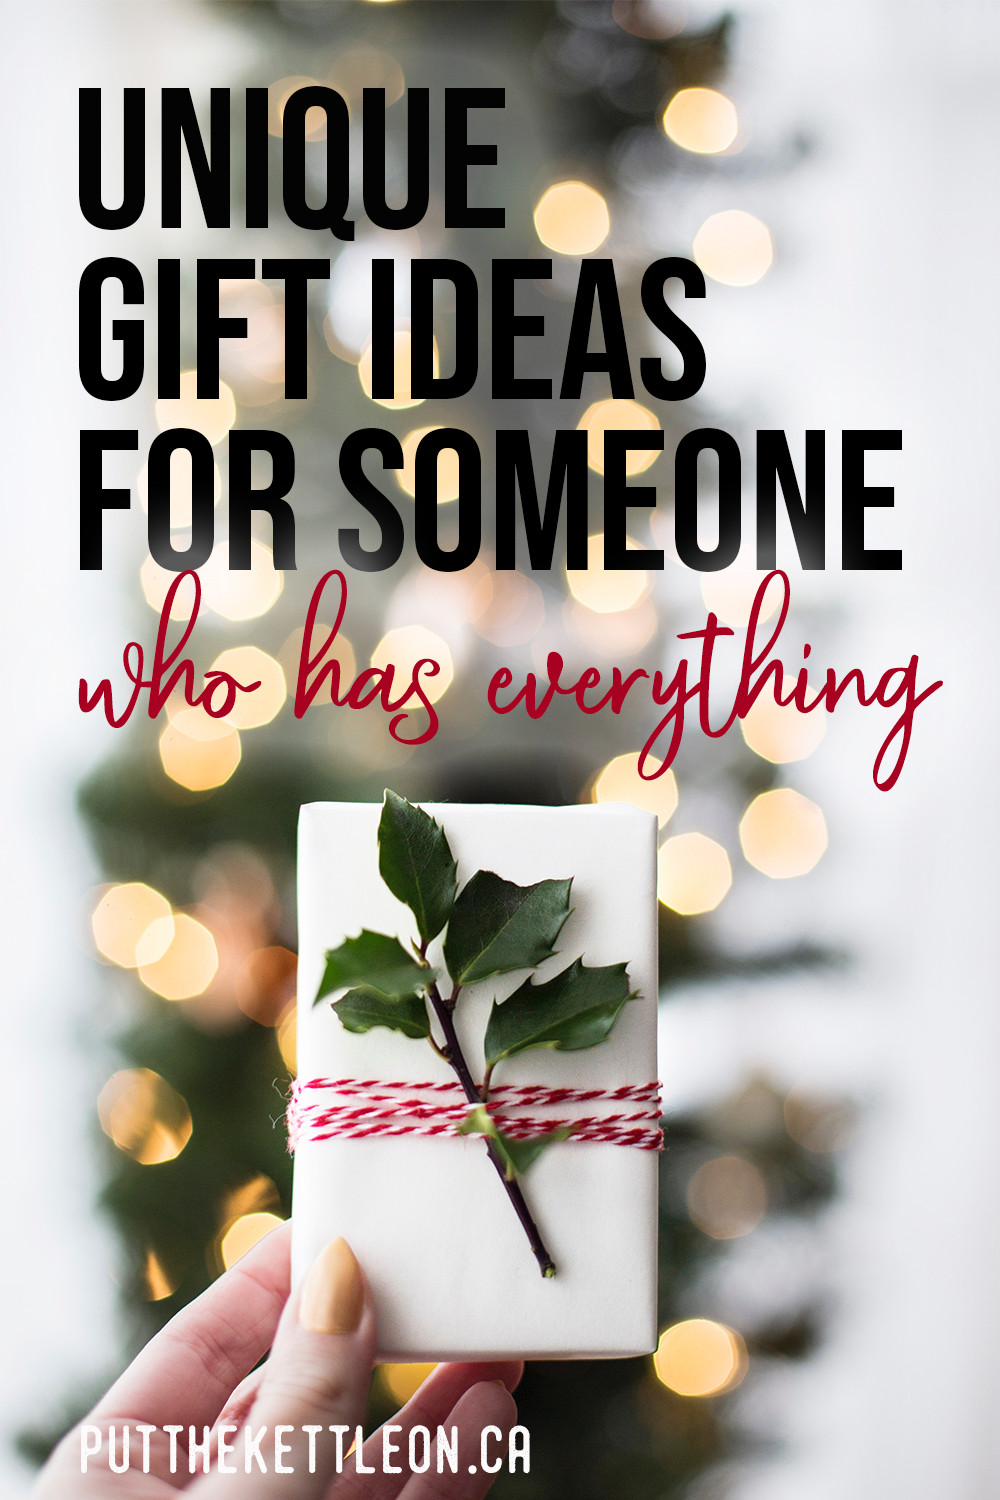 Christmas Gift Ideas For Someone Who Has Everything
 Unique Gift Ideas for Someone Who Has Everything